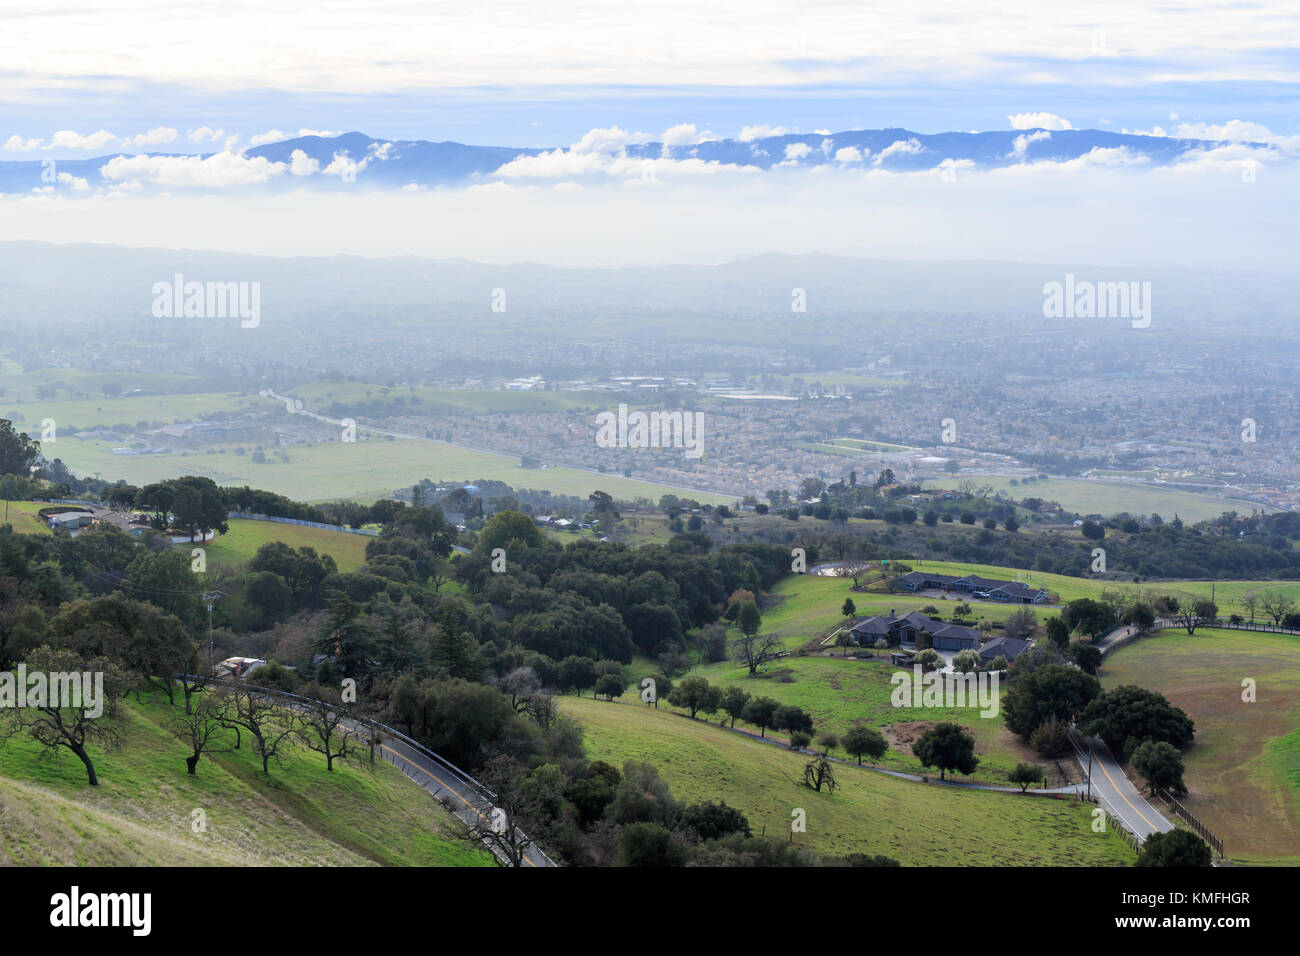 Silicon Valley Above The Fog And Under The Clouds. Stock Photo